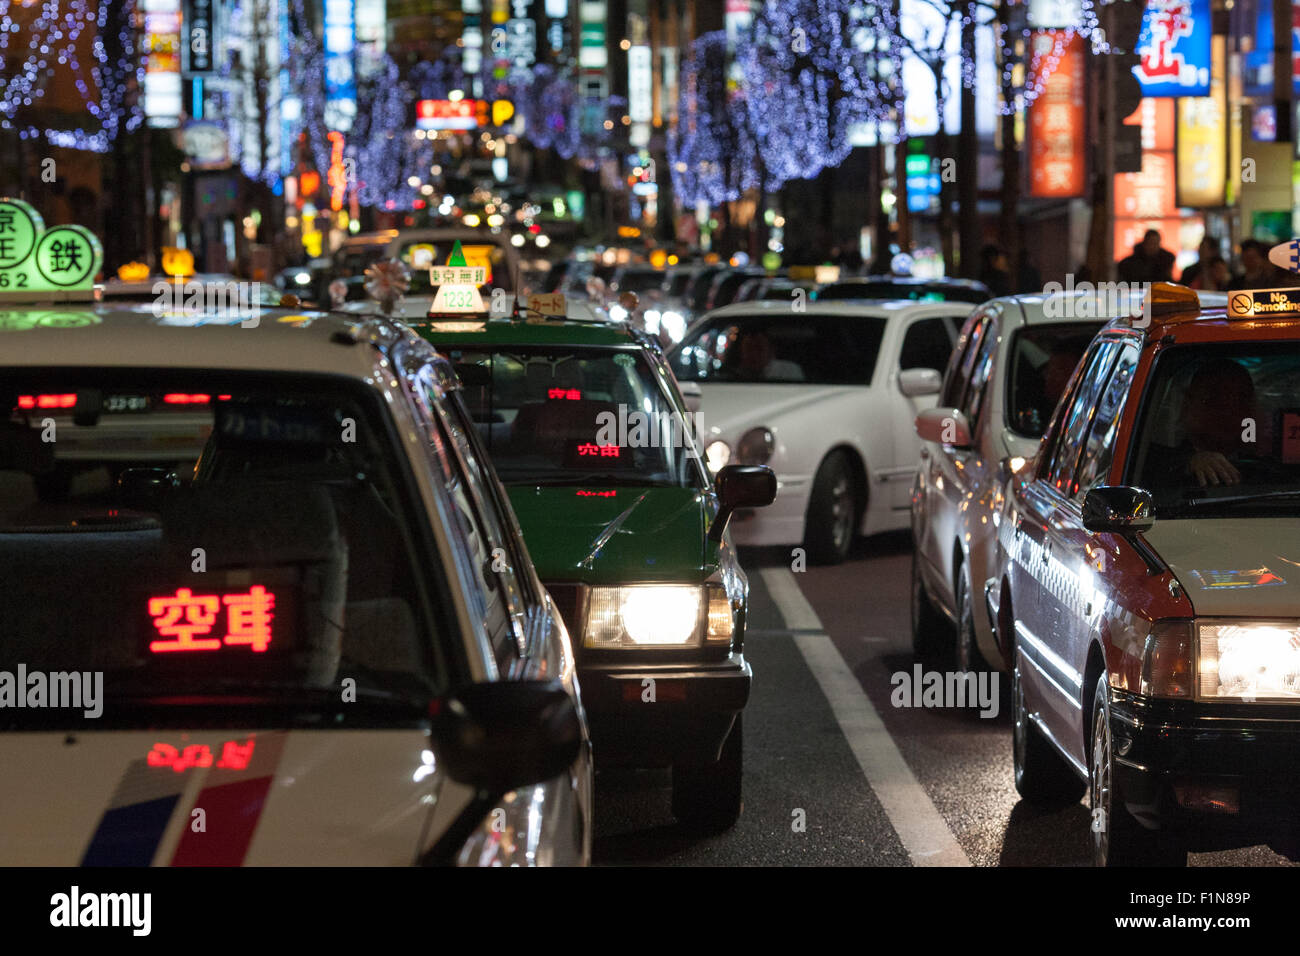 Japanese taxis in traffic with city lights in background Stock Photo